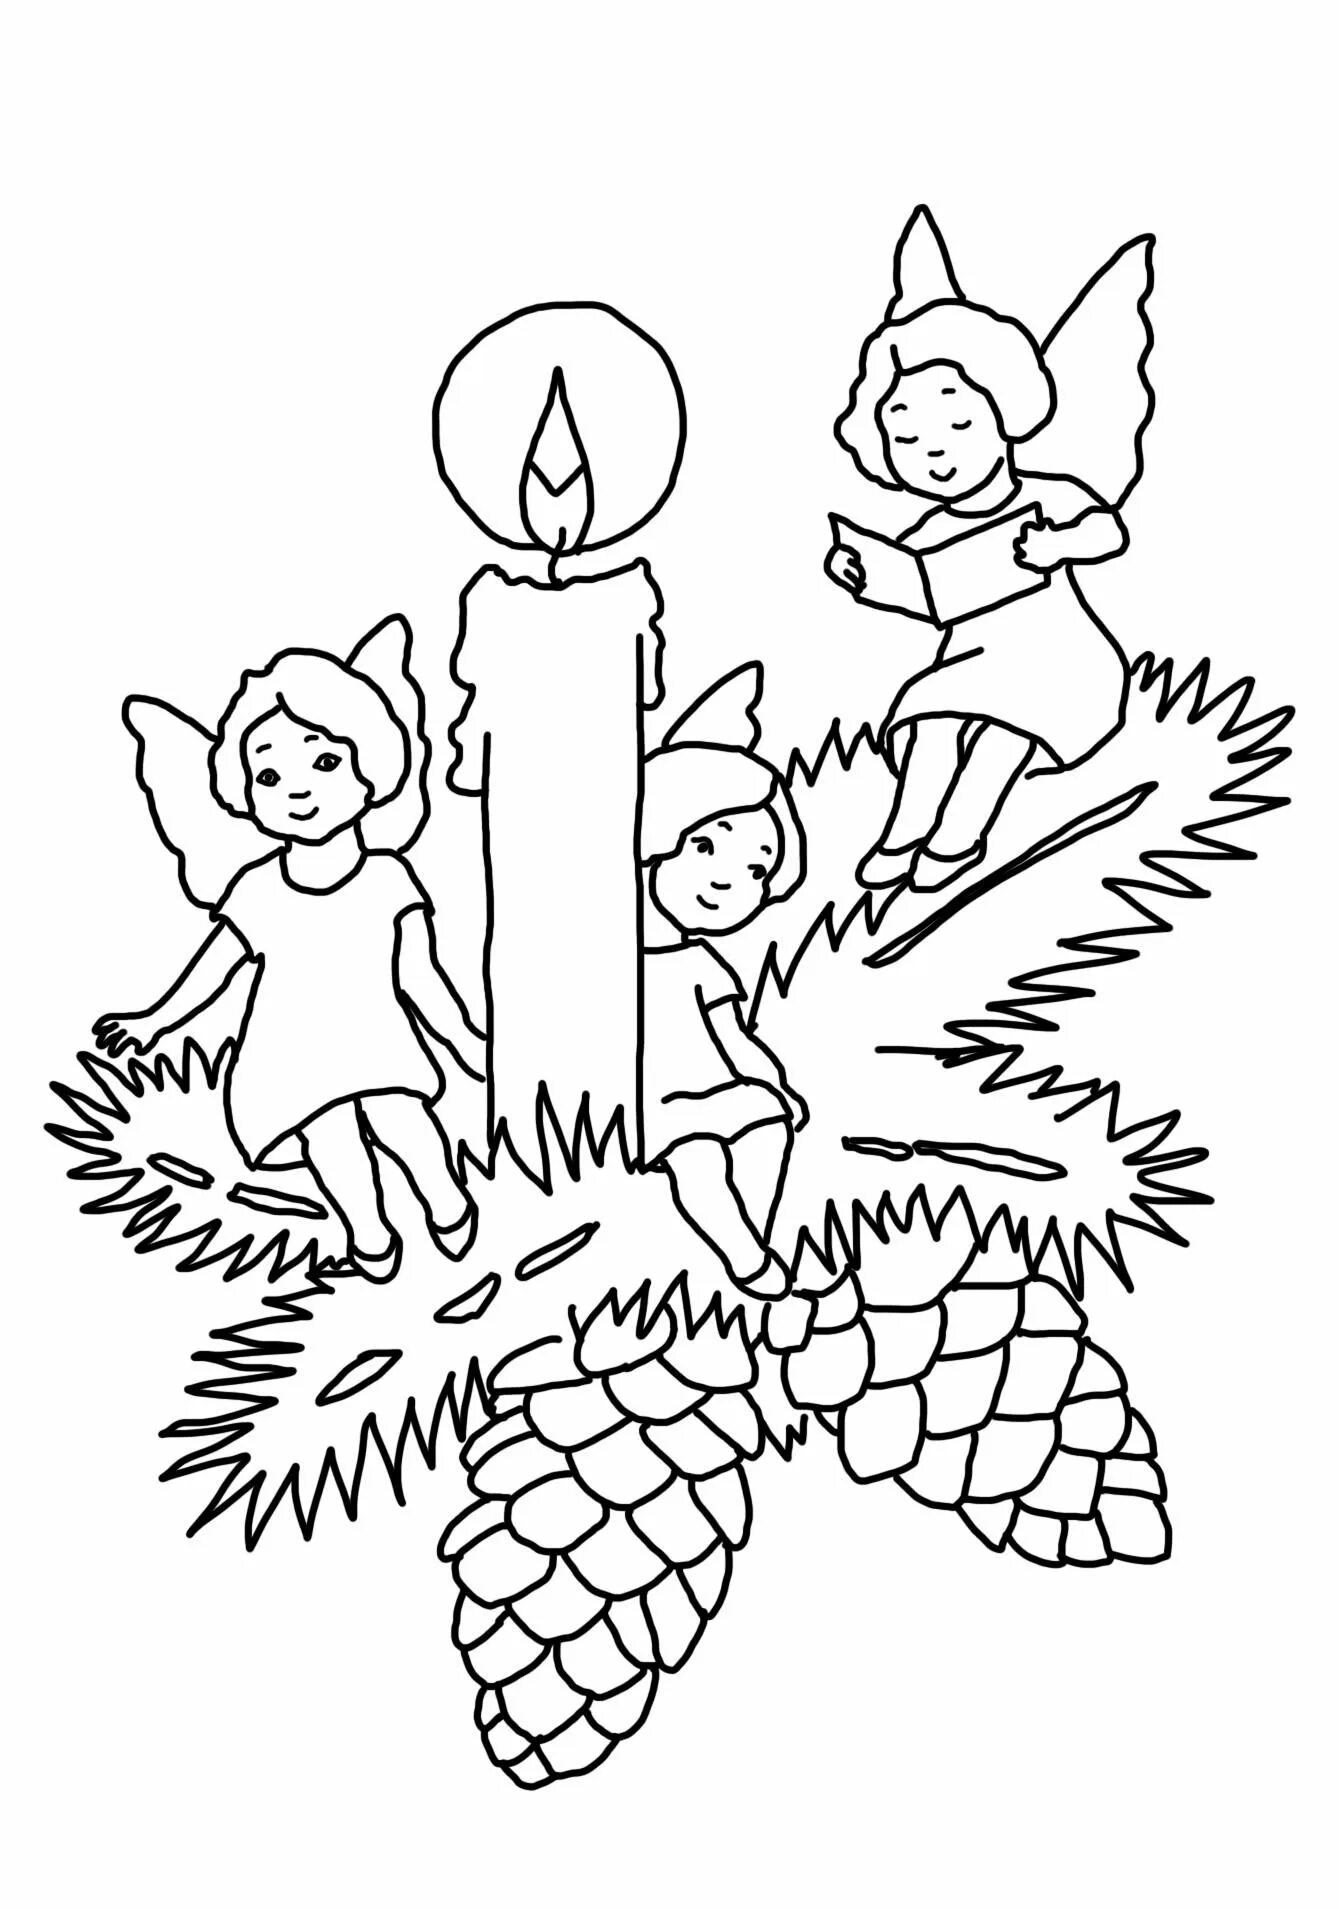 Blessed Christmas coloring book for 3-5 year olds